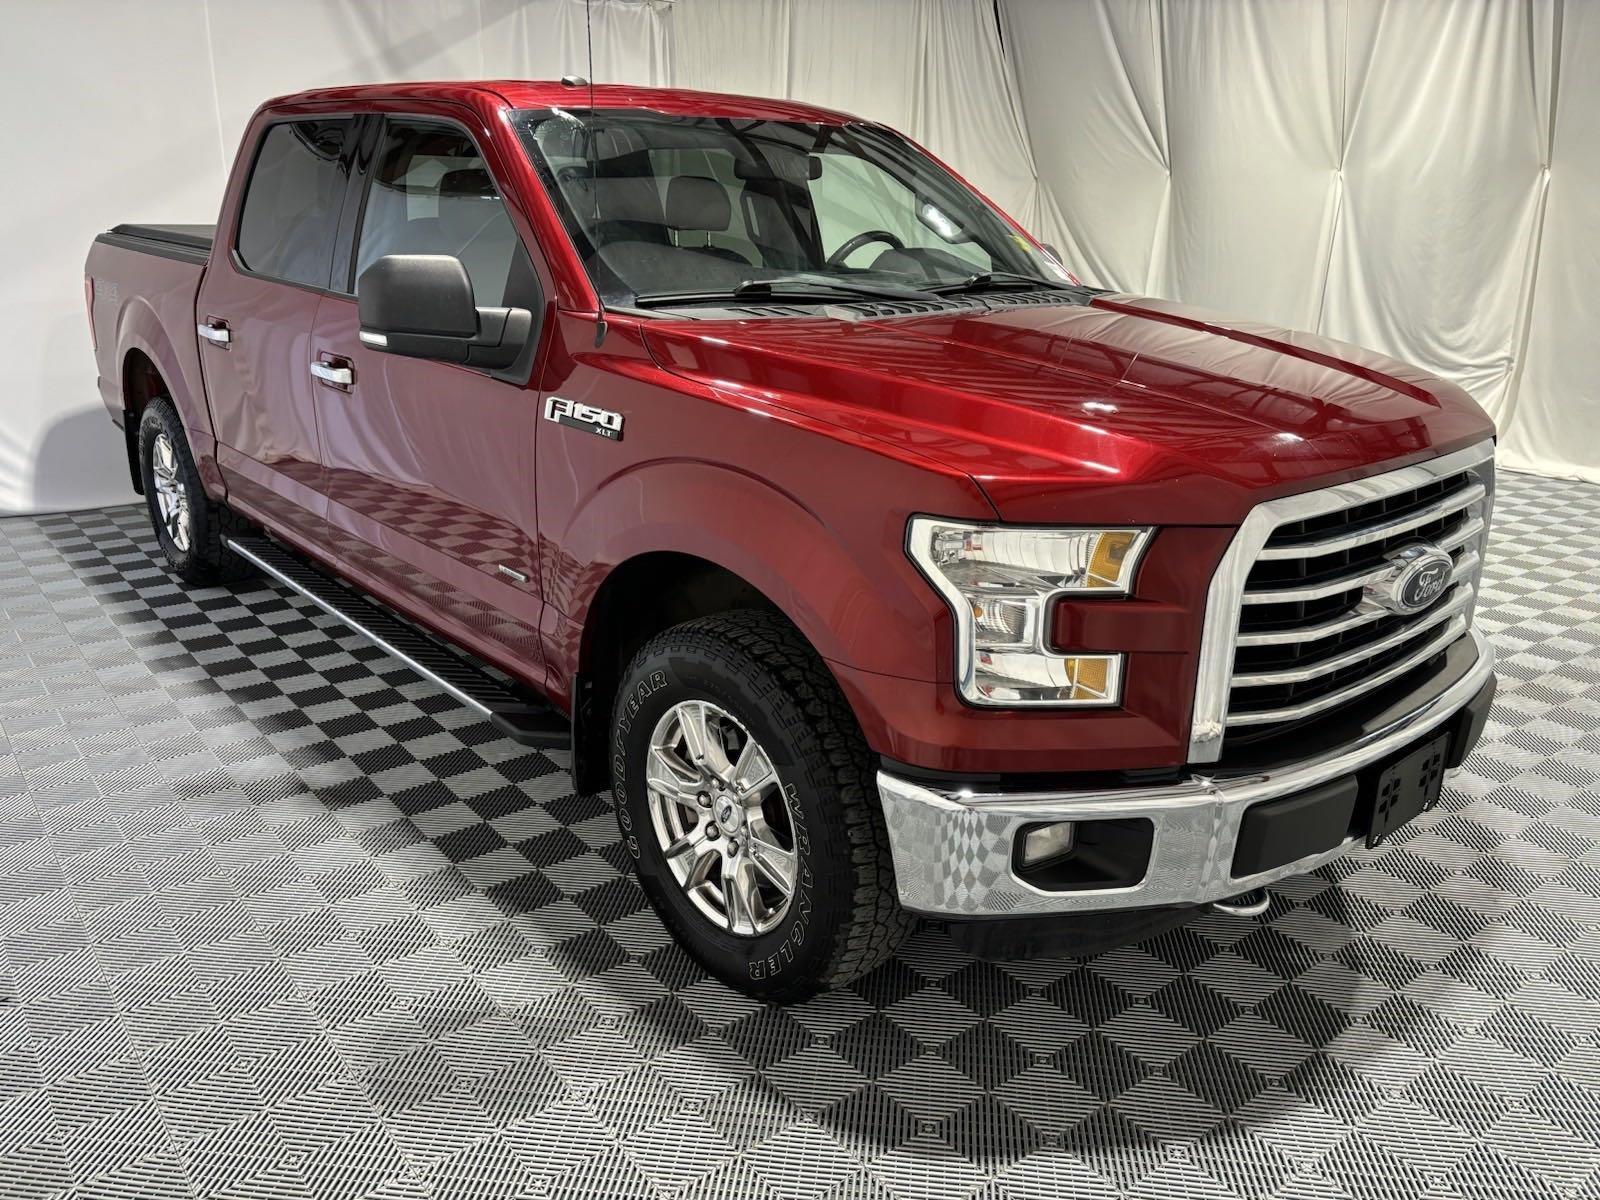 Used 2016 Ford F-150 XLT SuperCrew Cab Styleside for sale in St Joseph MO